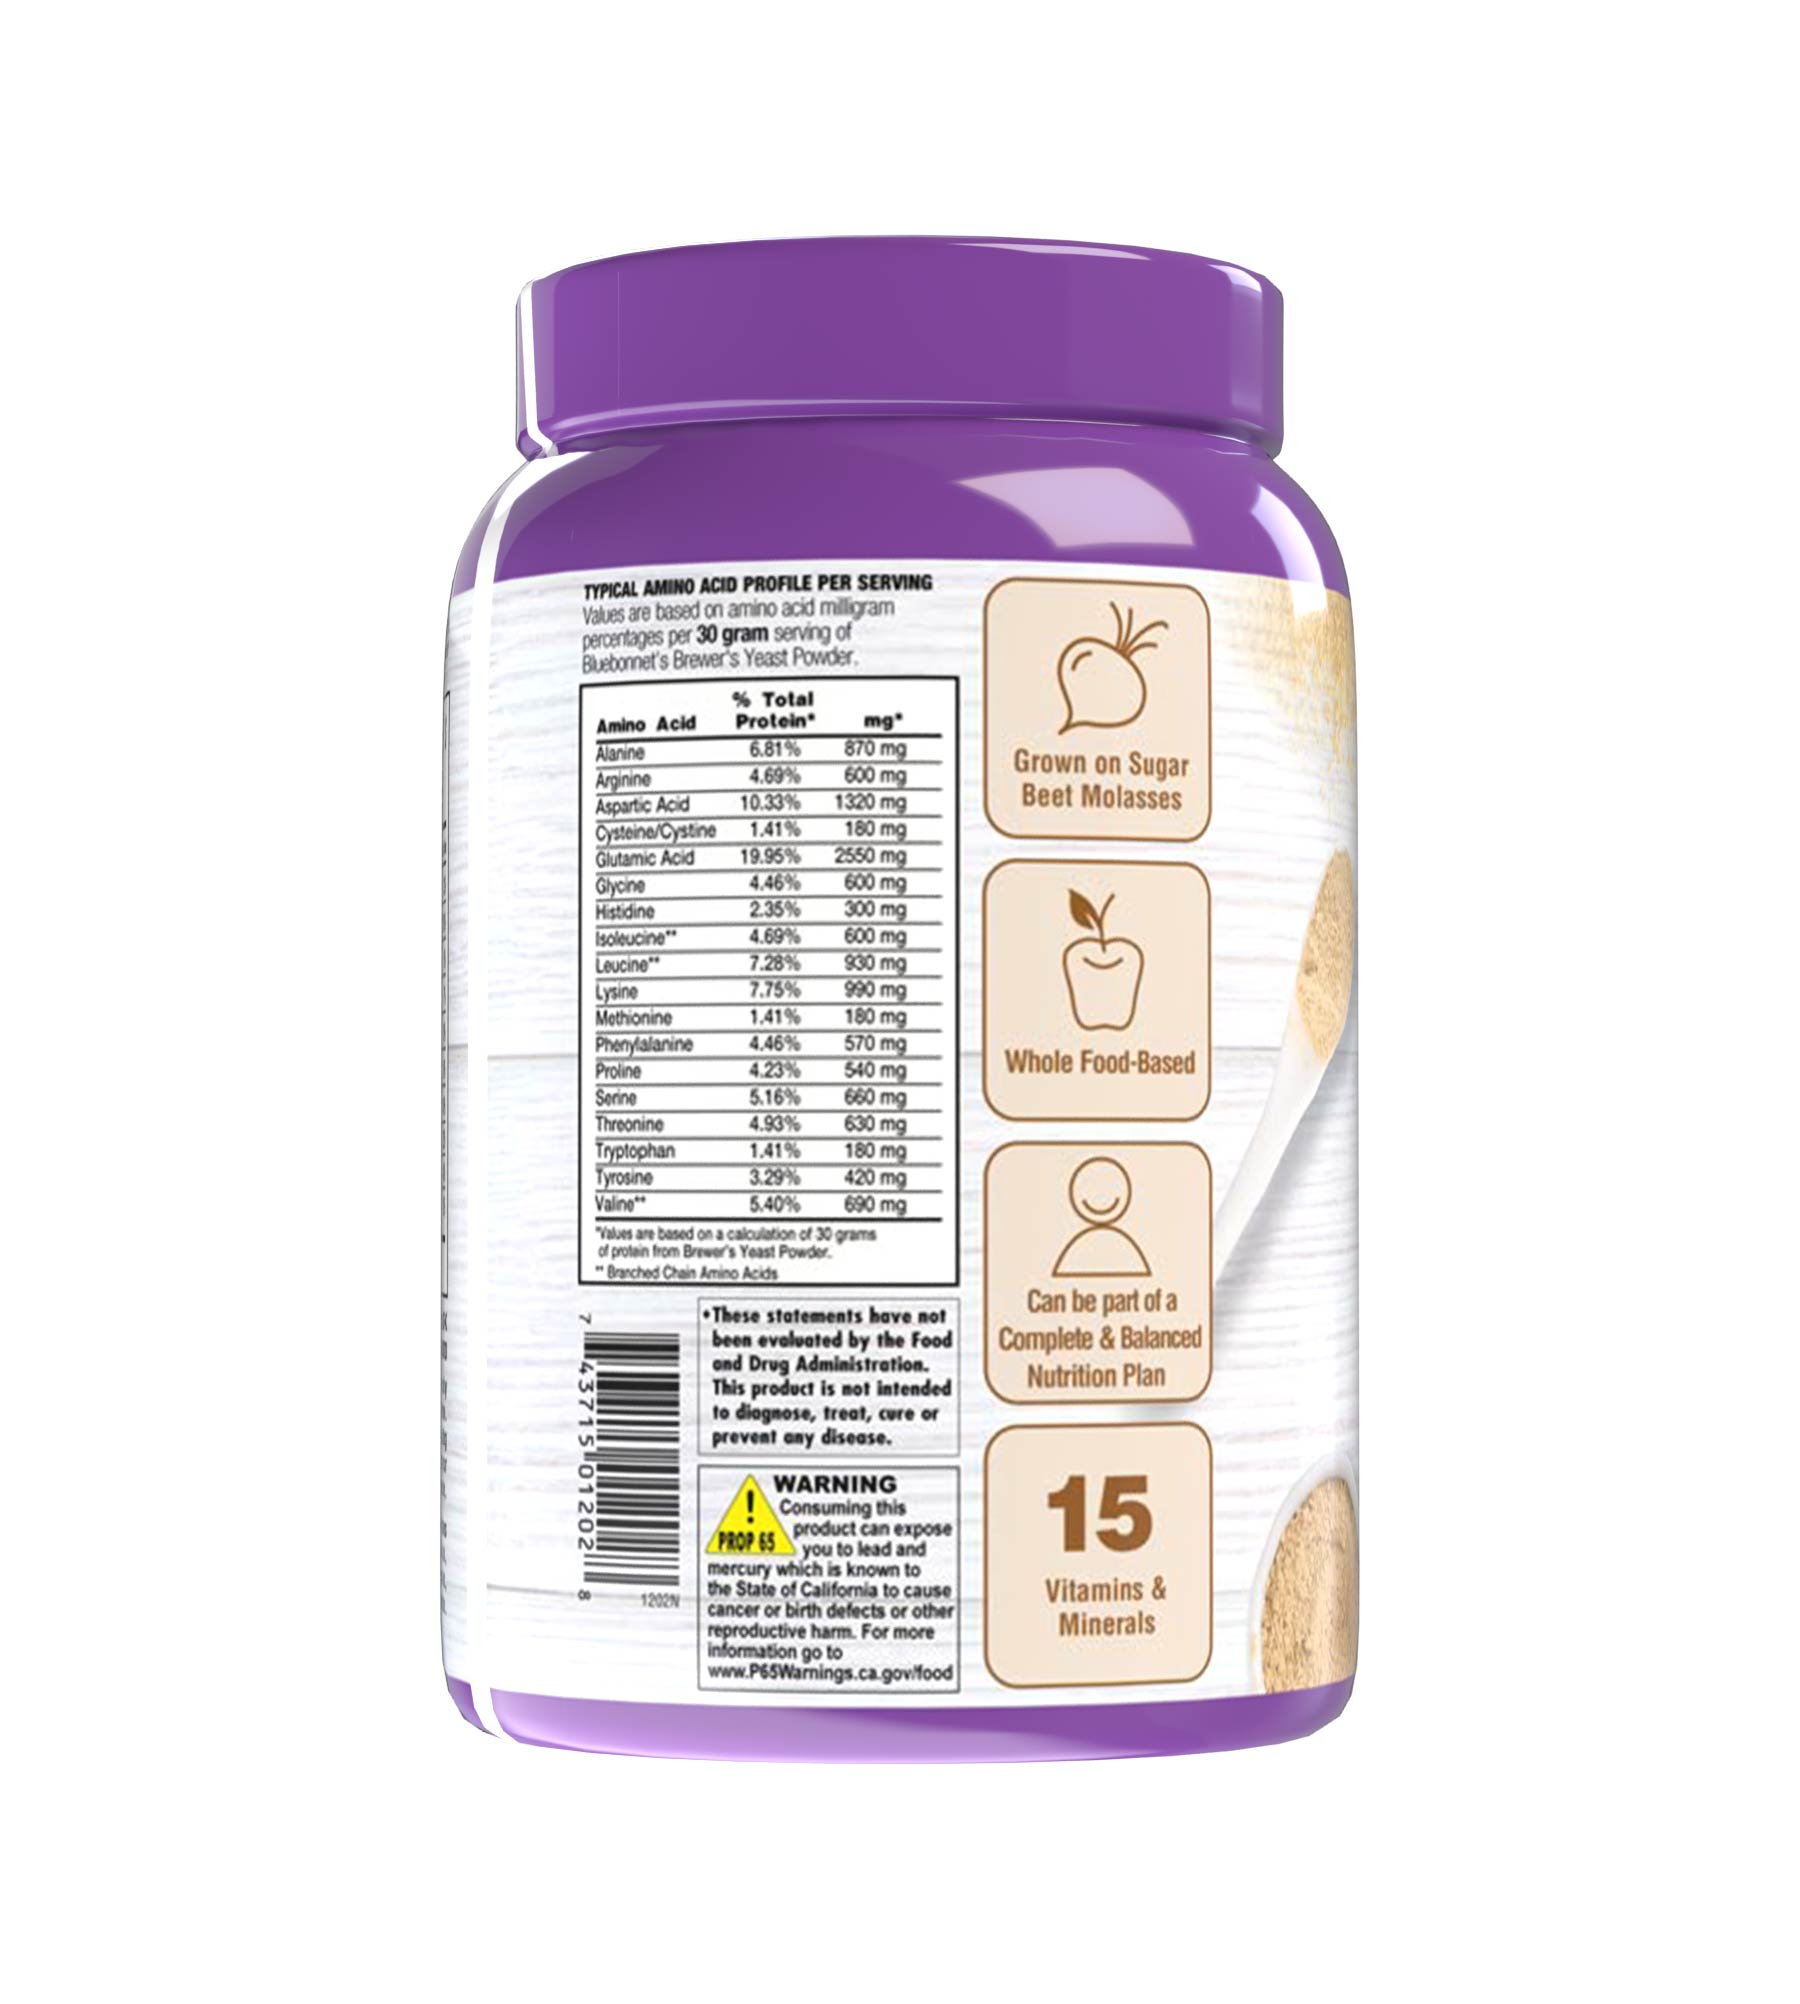 Bluebonnet’s Super Earth® Brewer’s Yeast Powder is formulated with a select strain of Saccharomyces cerevisiae that is carefully grown on certified non-GMO sugar beet molasses instead of the typical grain-derived brewer’s yeast that is recovered from the beer-brewing process. Description panel. #size_2 lb